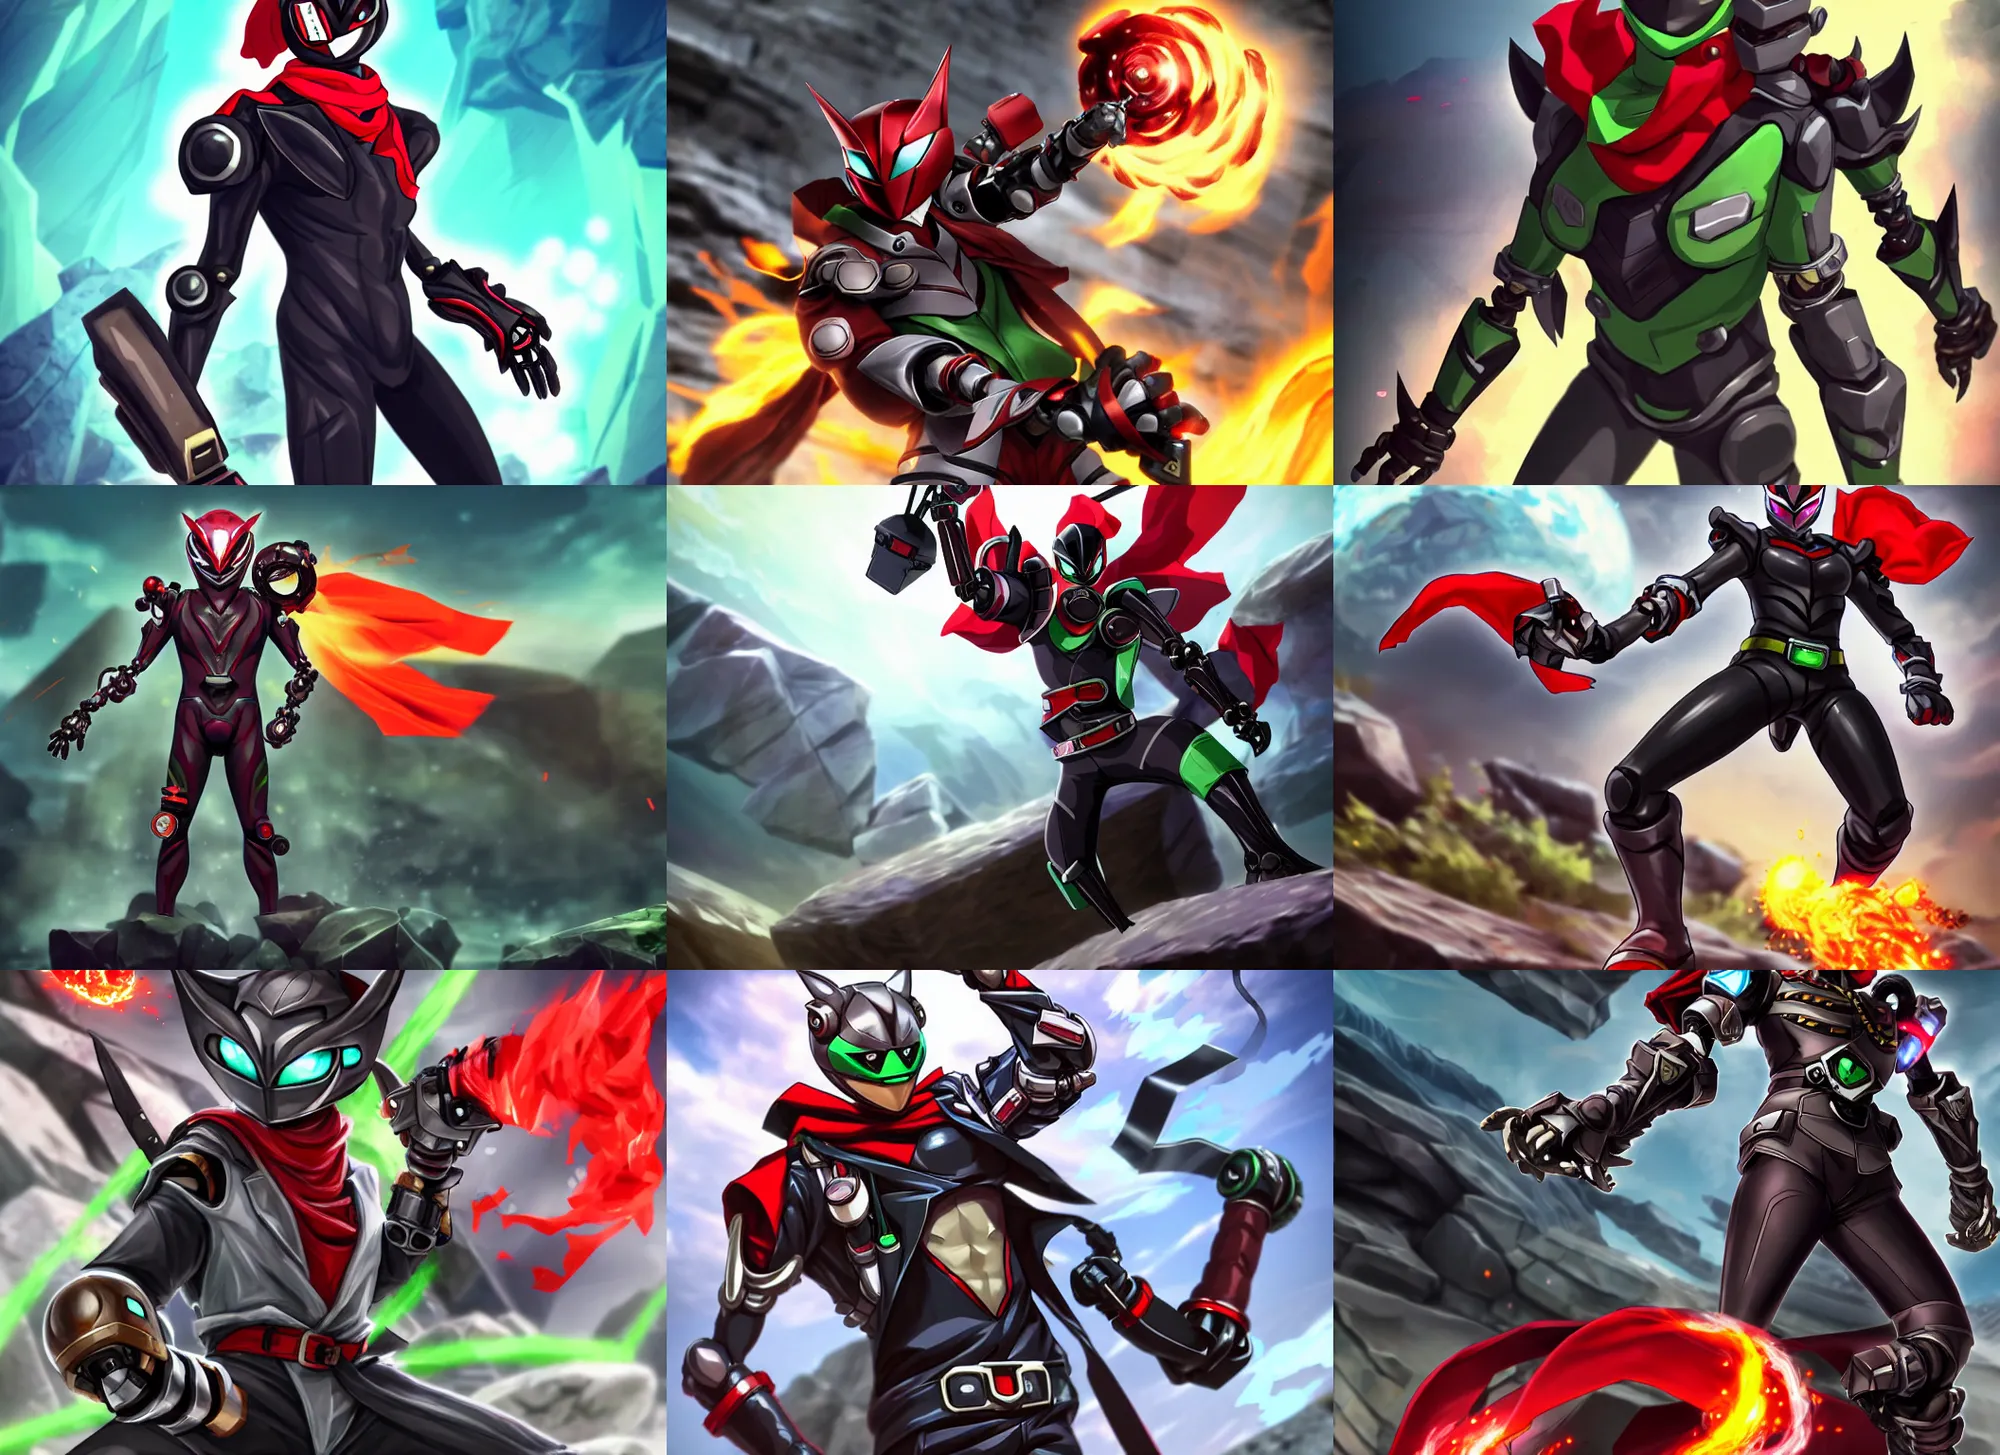 Prompt: Kamen Rider!!!!!!!!!!!! with a red scarf billowing behind him standing in a rock quarry, full body single character, League of Legends Character Splash Art!!!!, rubber suit, biomechanical elements, Arcane style!!!!!, action scene, fight scene, good value control, high quality, 4k, ultra realistic, highly detailed, illustration, promotional image, matte painting, rule of thirds, centered, cinematography, moonlit night,